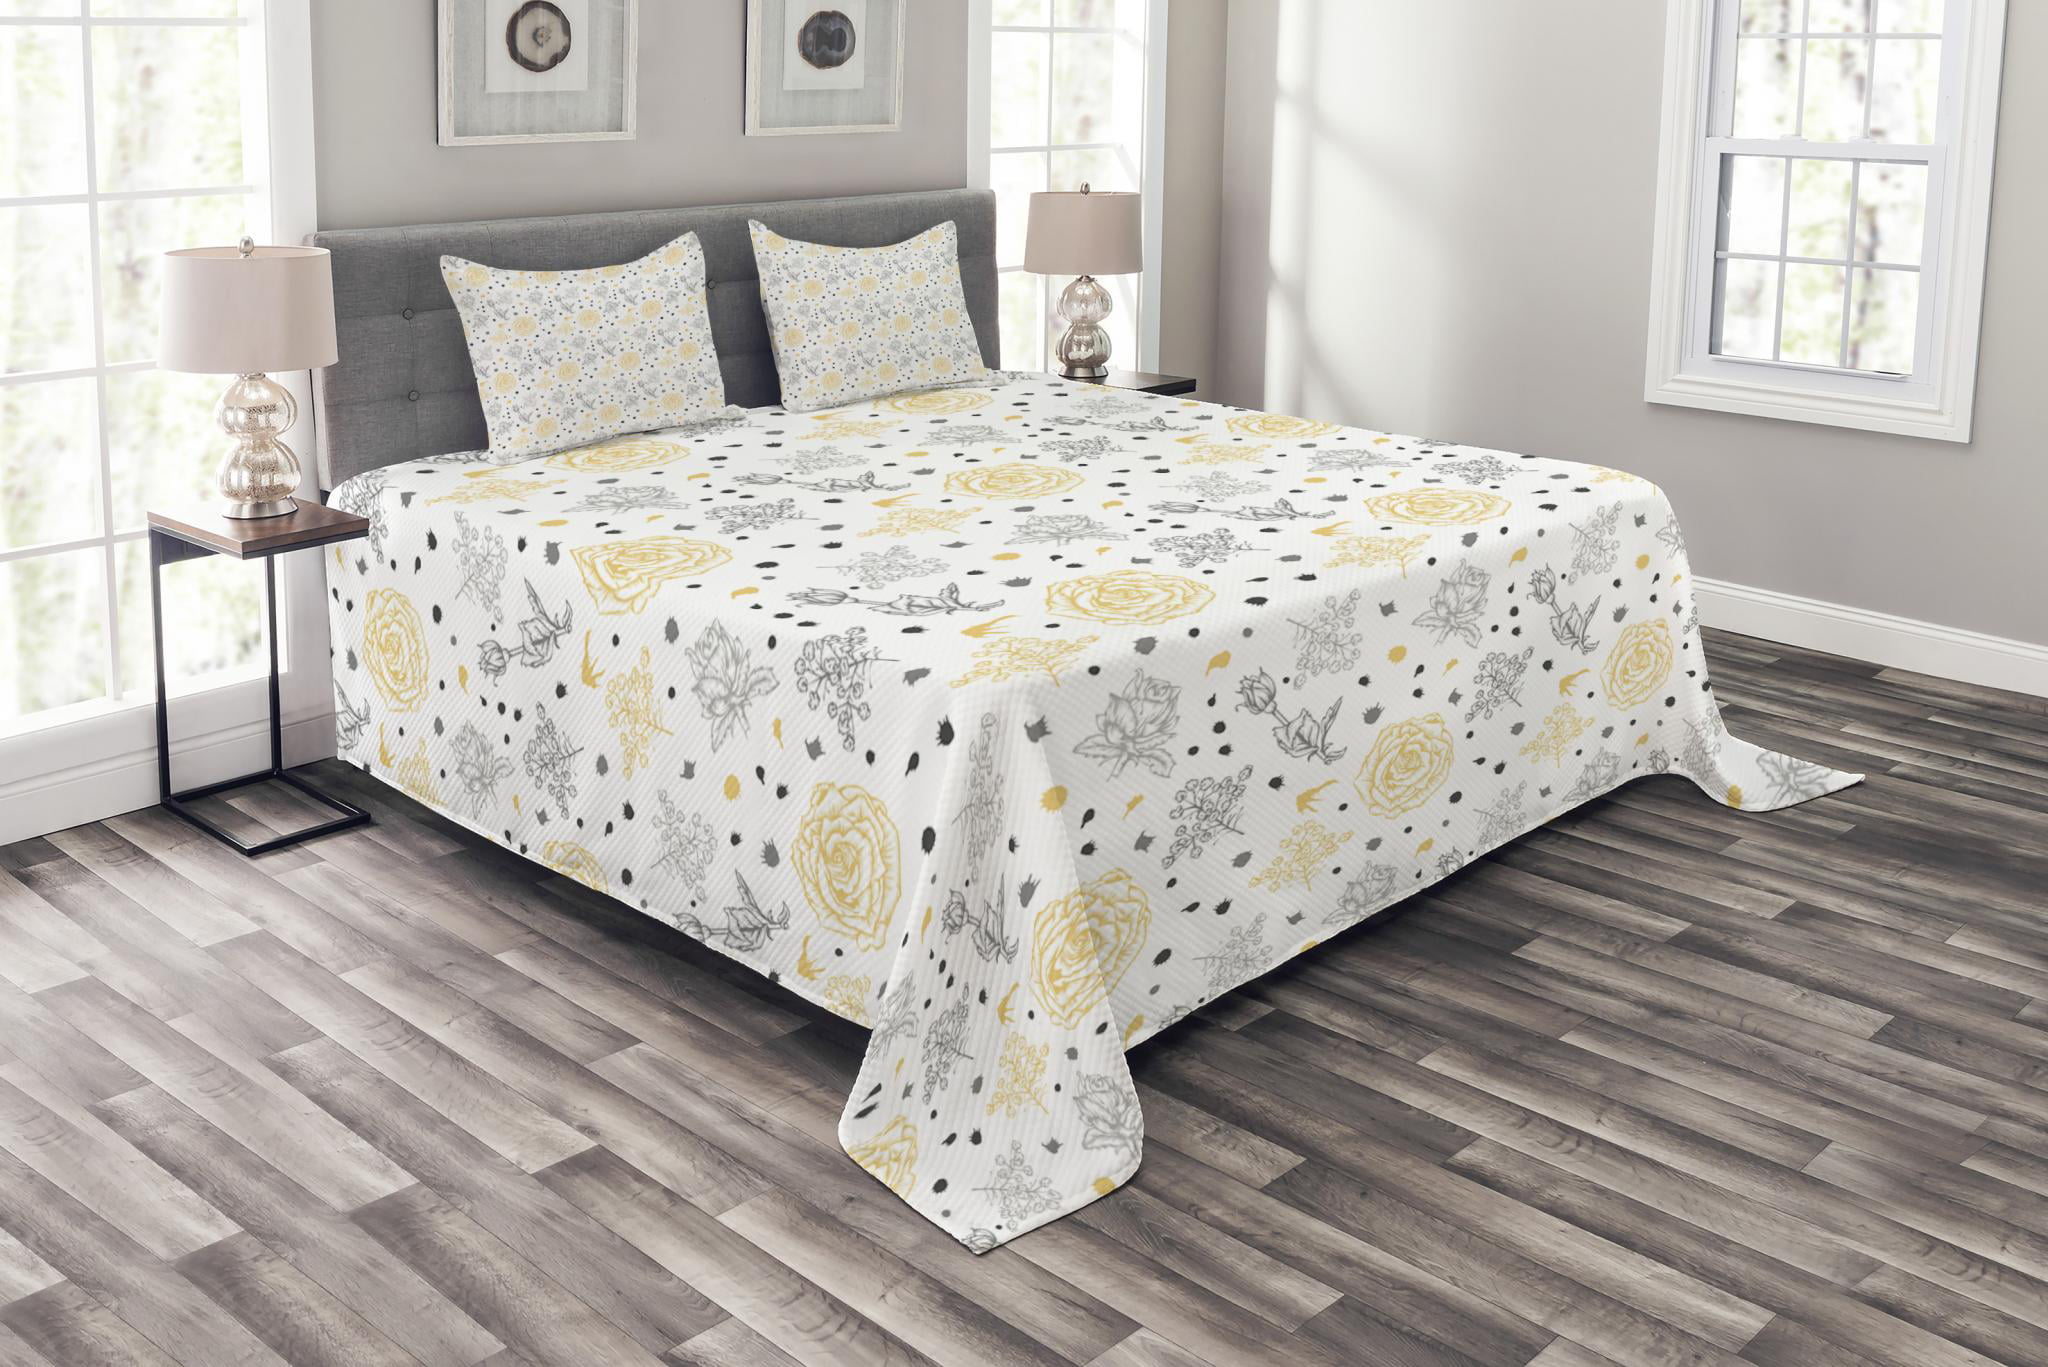 Grey And Yellow Bedspread Set King Size, Grey Cotton King Size Bedding Set